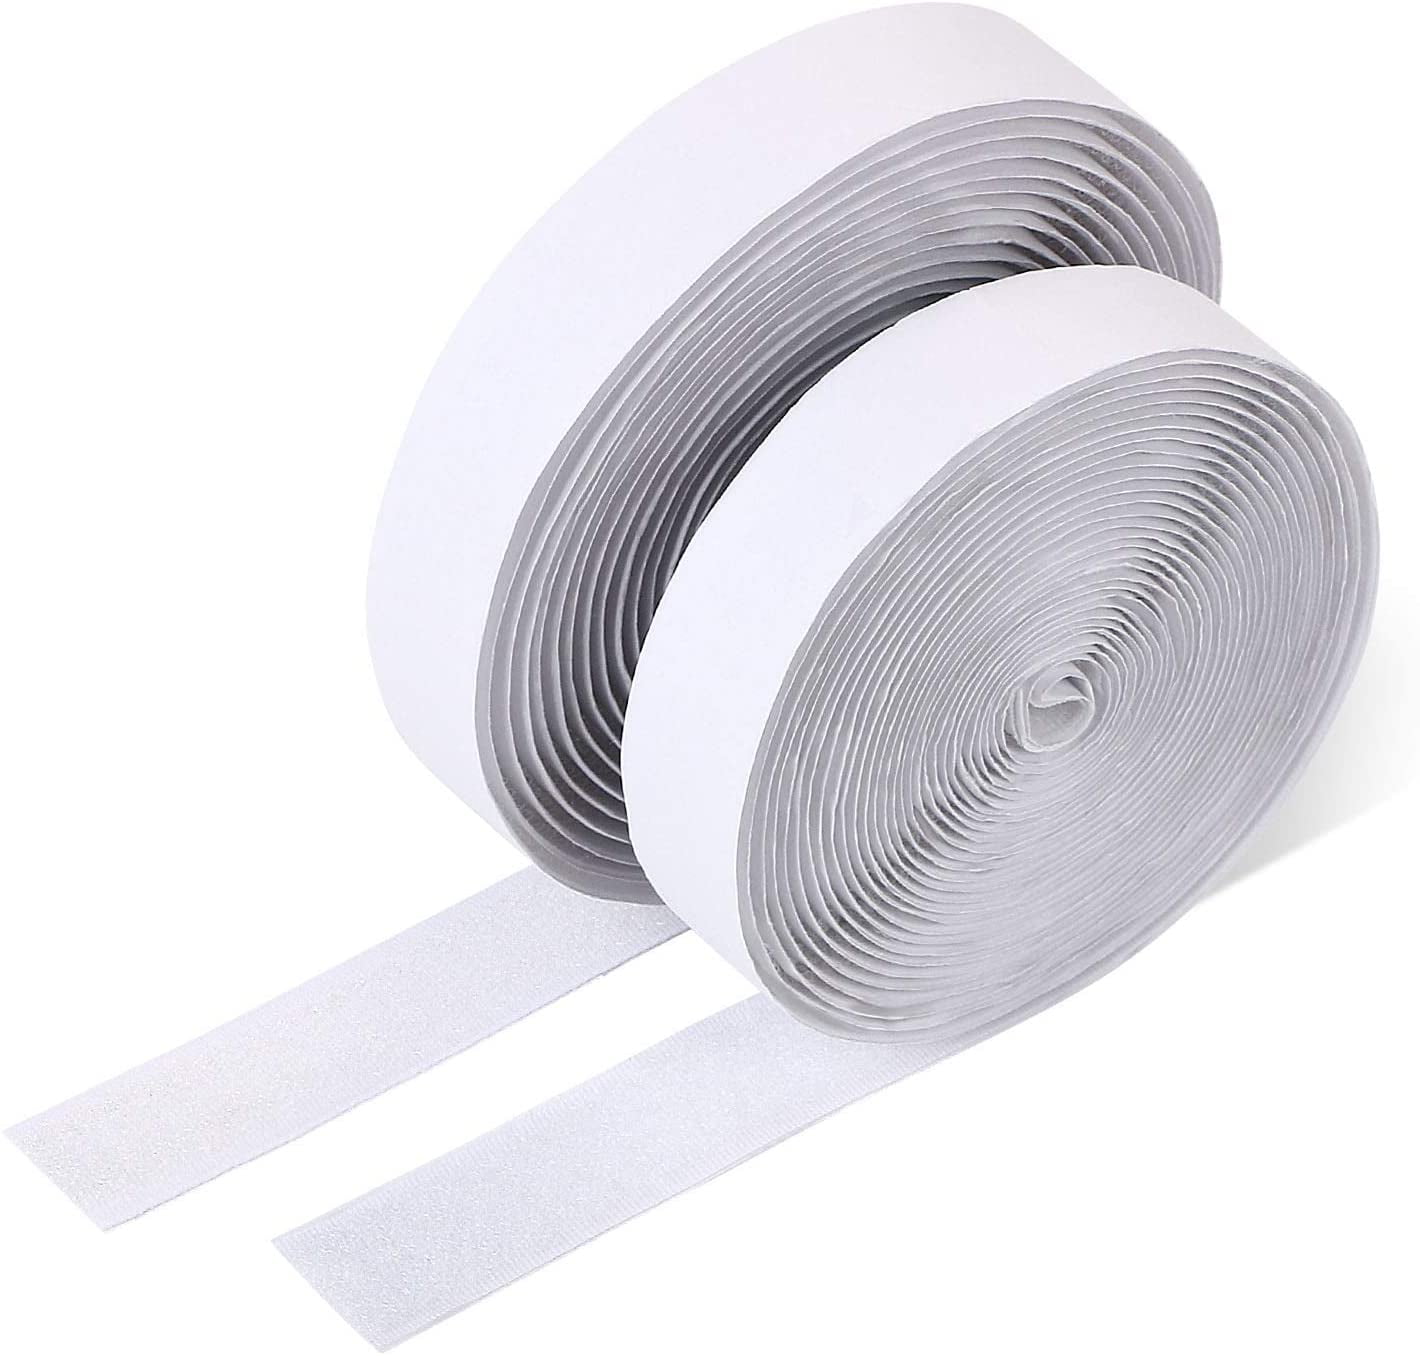 Velcro Tape Self-adhesive 50m Extra Strong,double-sided Adhesive